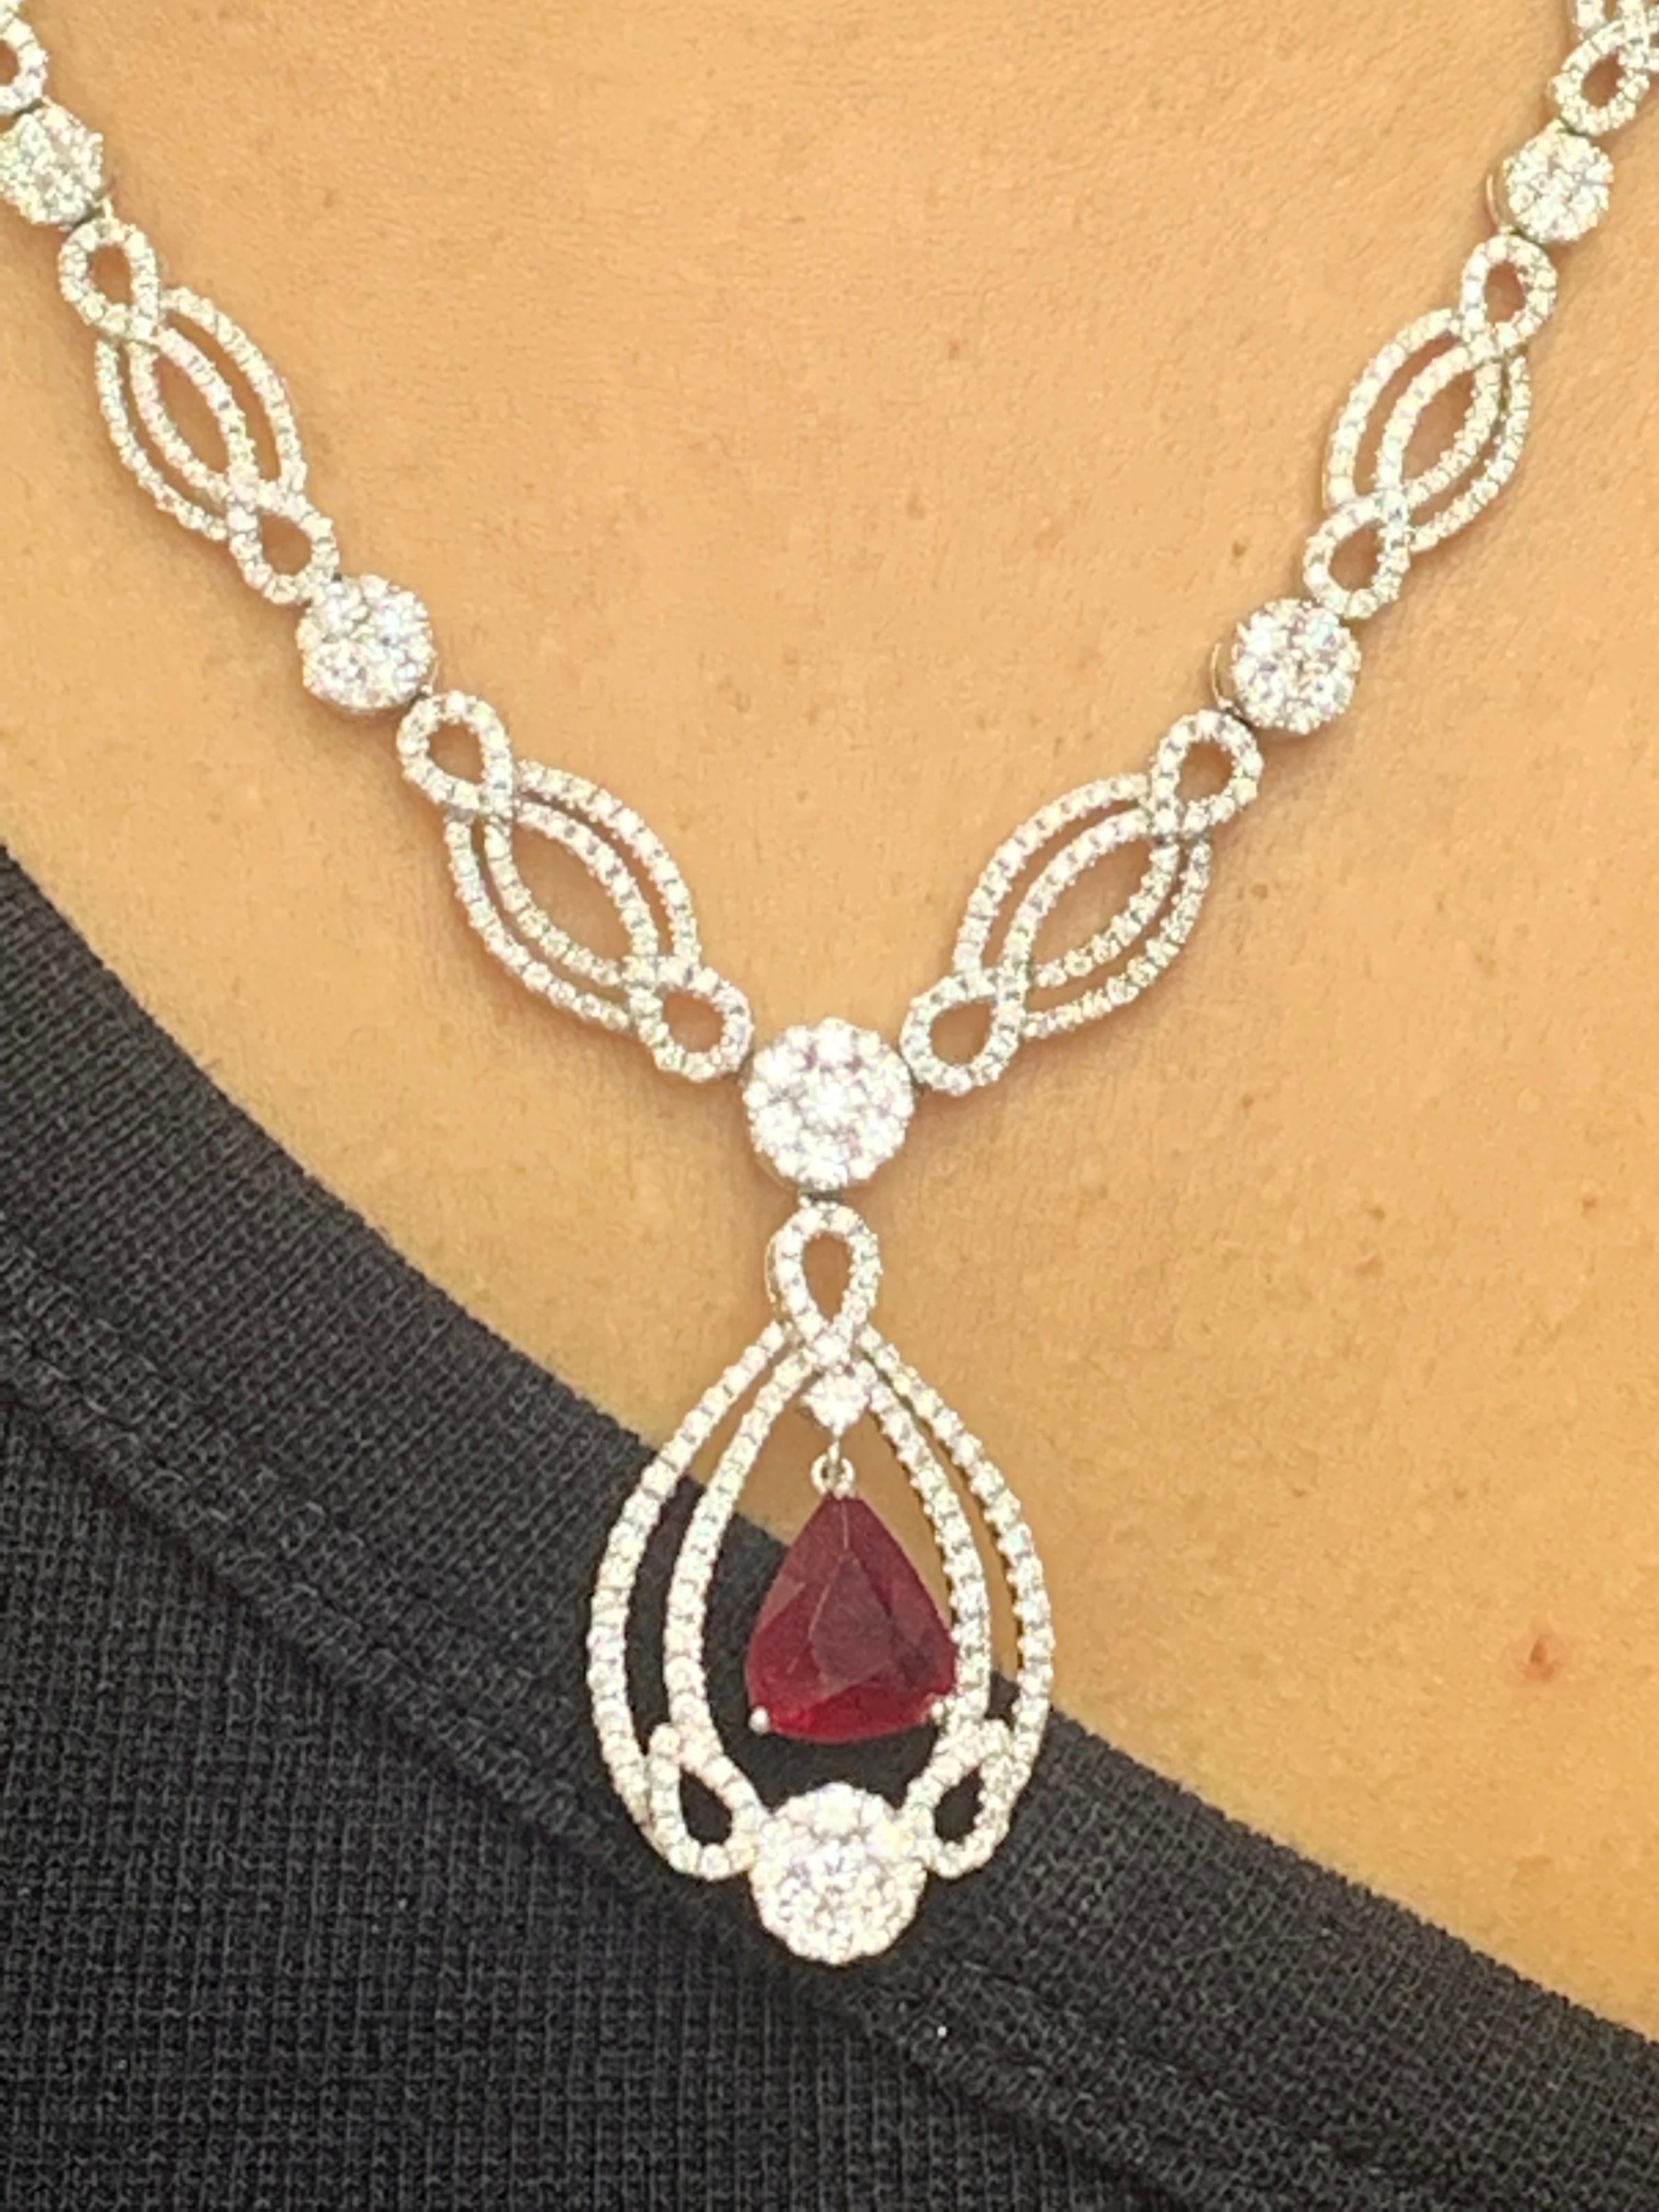 3.52 Carat Pear Shape Ruby and Diamond Necklace in 18 White Gold For Sale 4